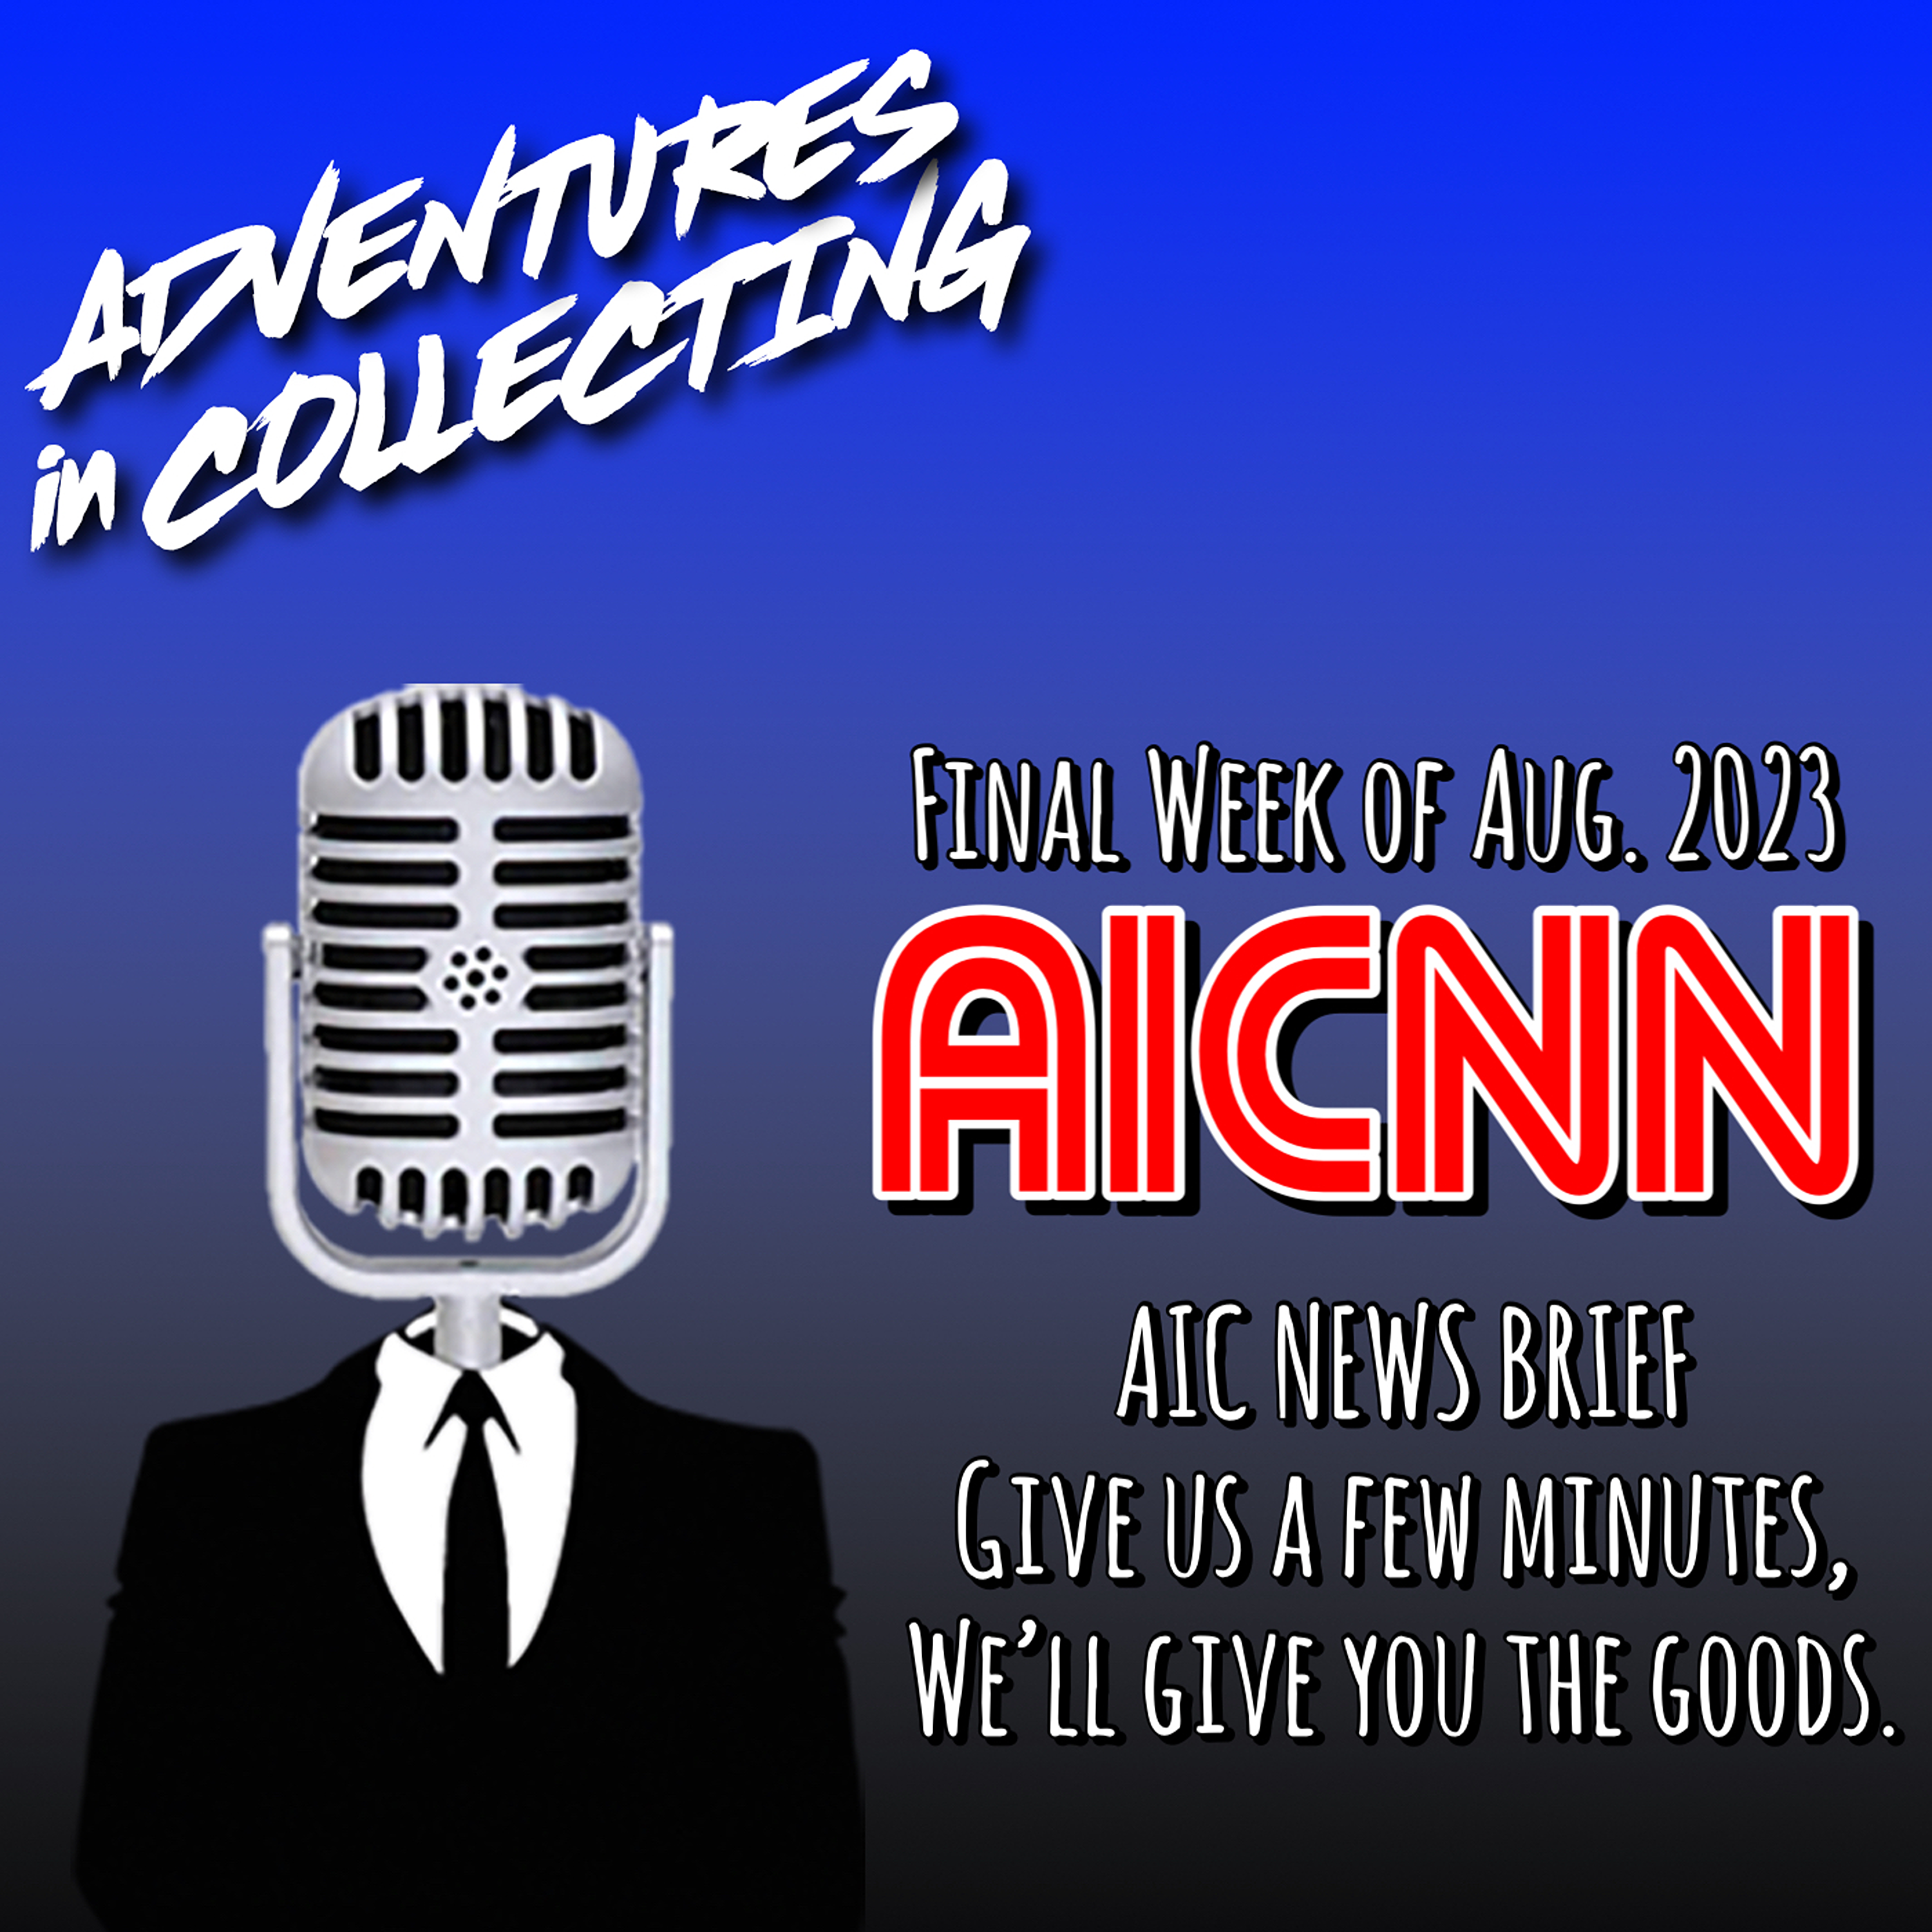 AIC NEWS: Final Week of August 2023 – Adventures in Collecting